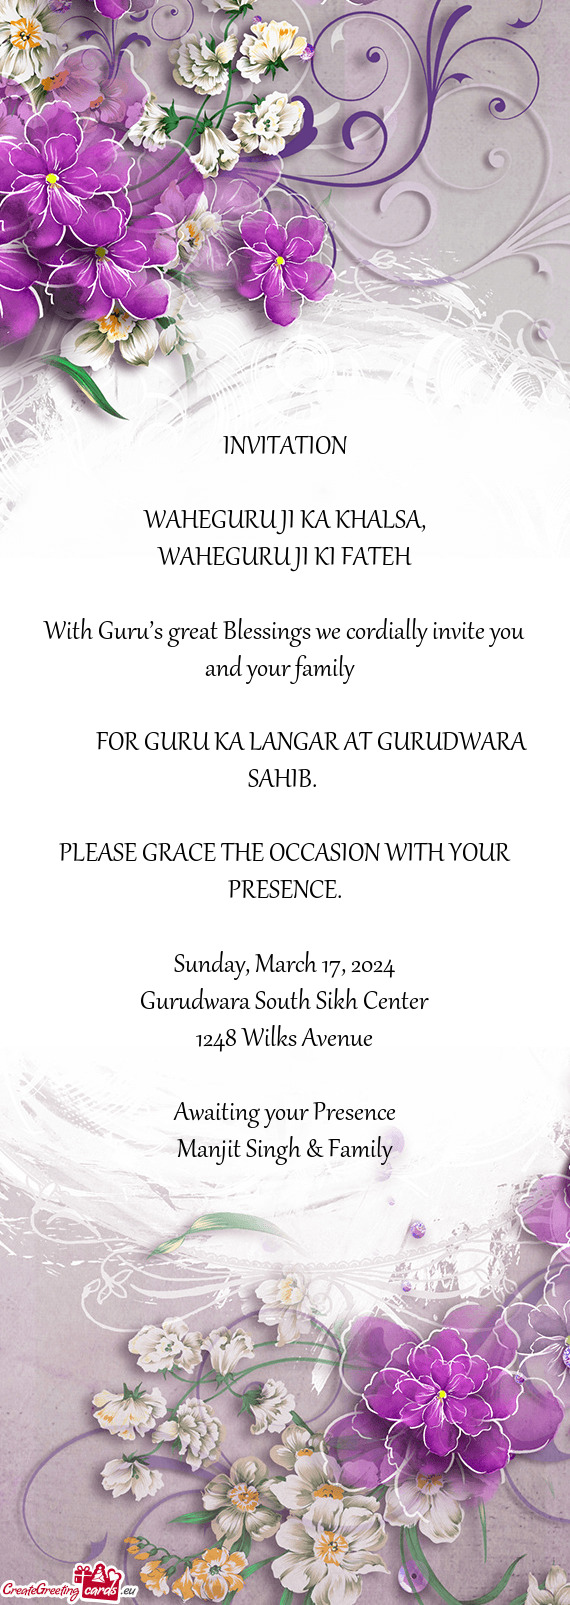 With Guru’s great Blessings we cordially invite you and your family